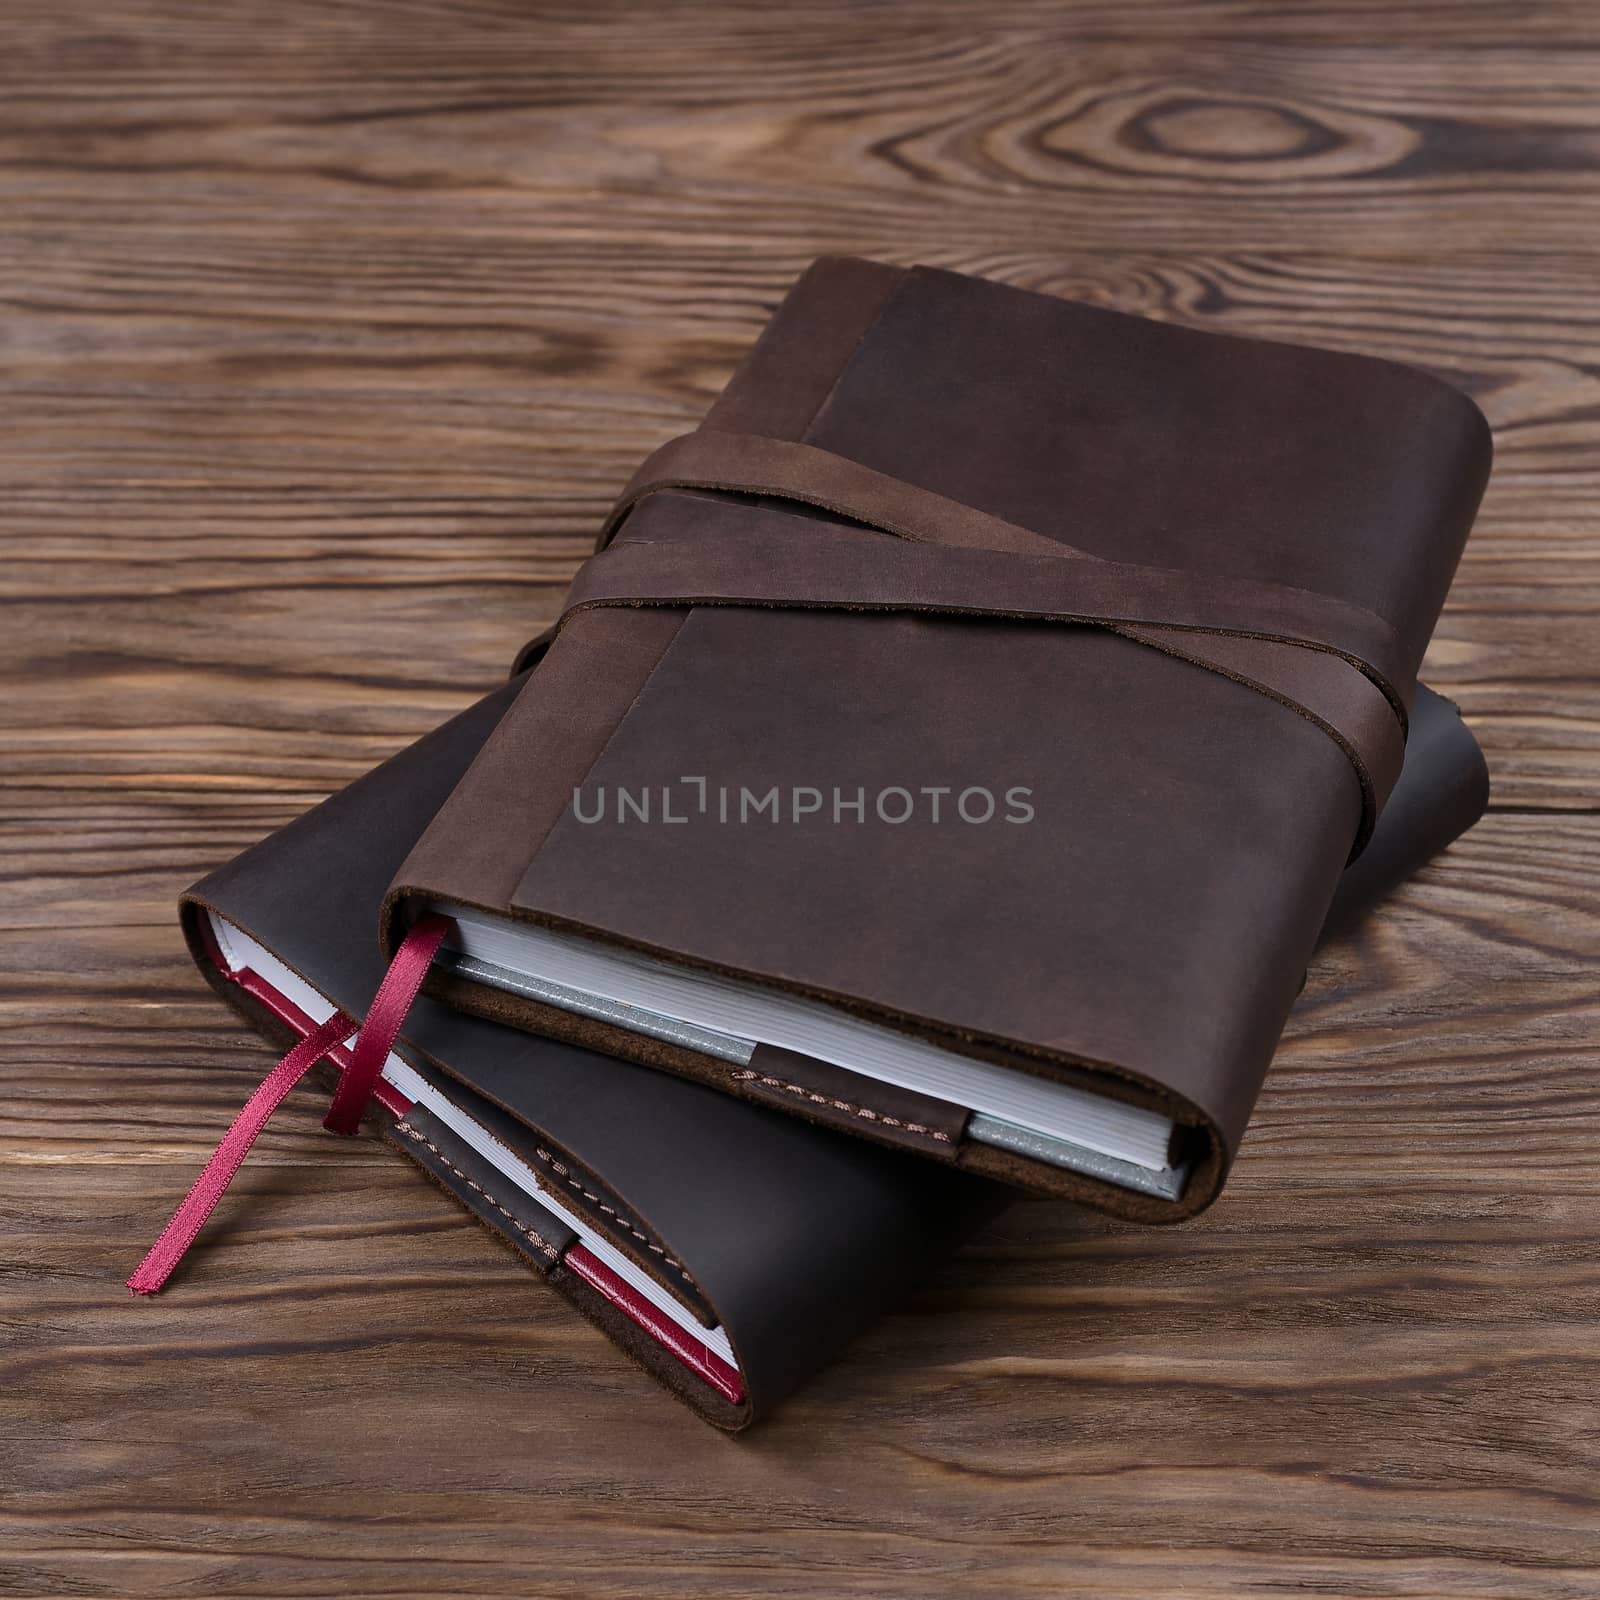 Brown and black handmade leather notebook cover with notebook inside on wooden background. Stock photo of luxury business accessories.